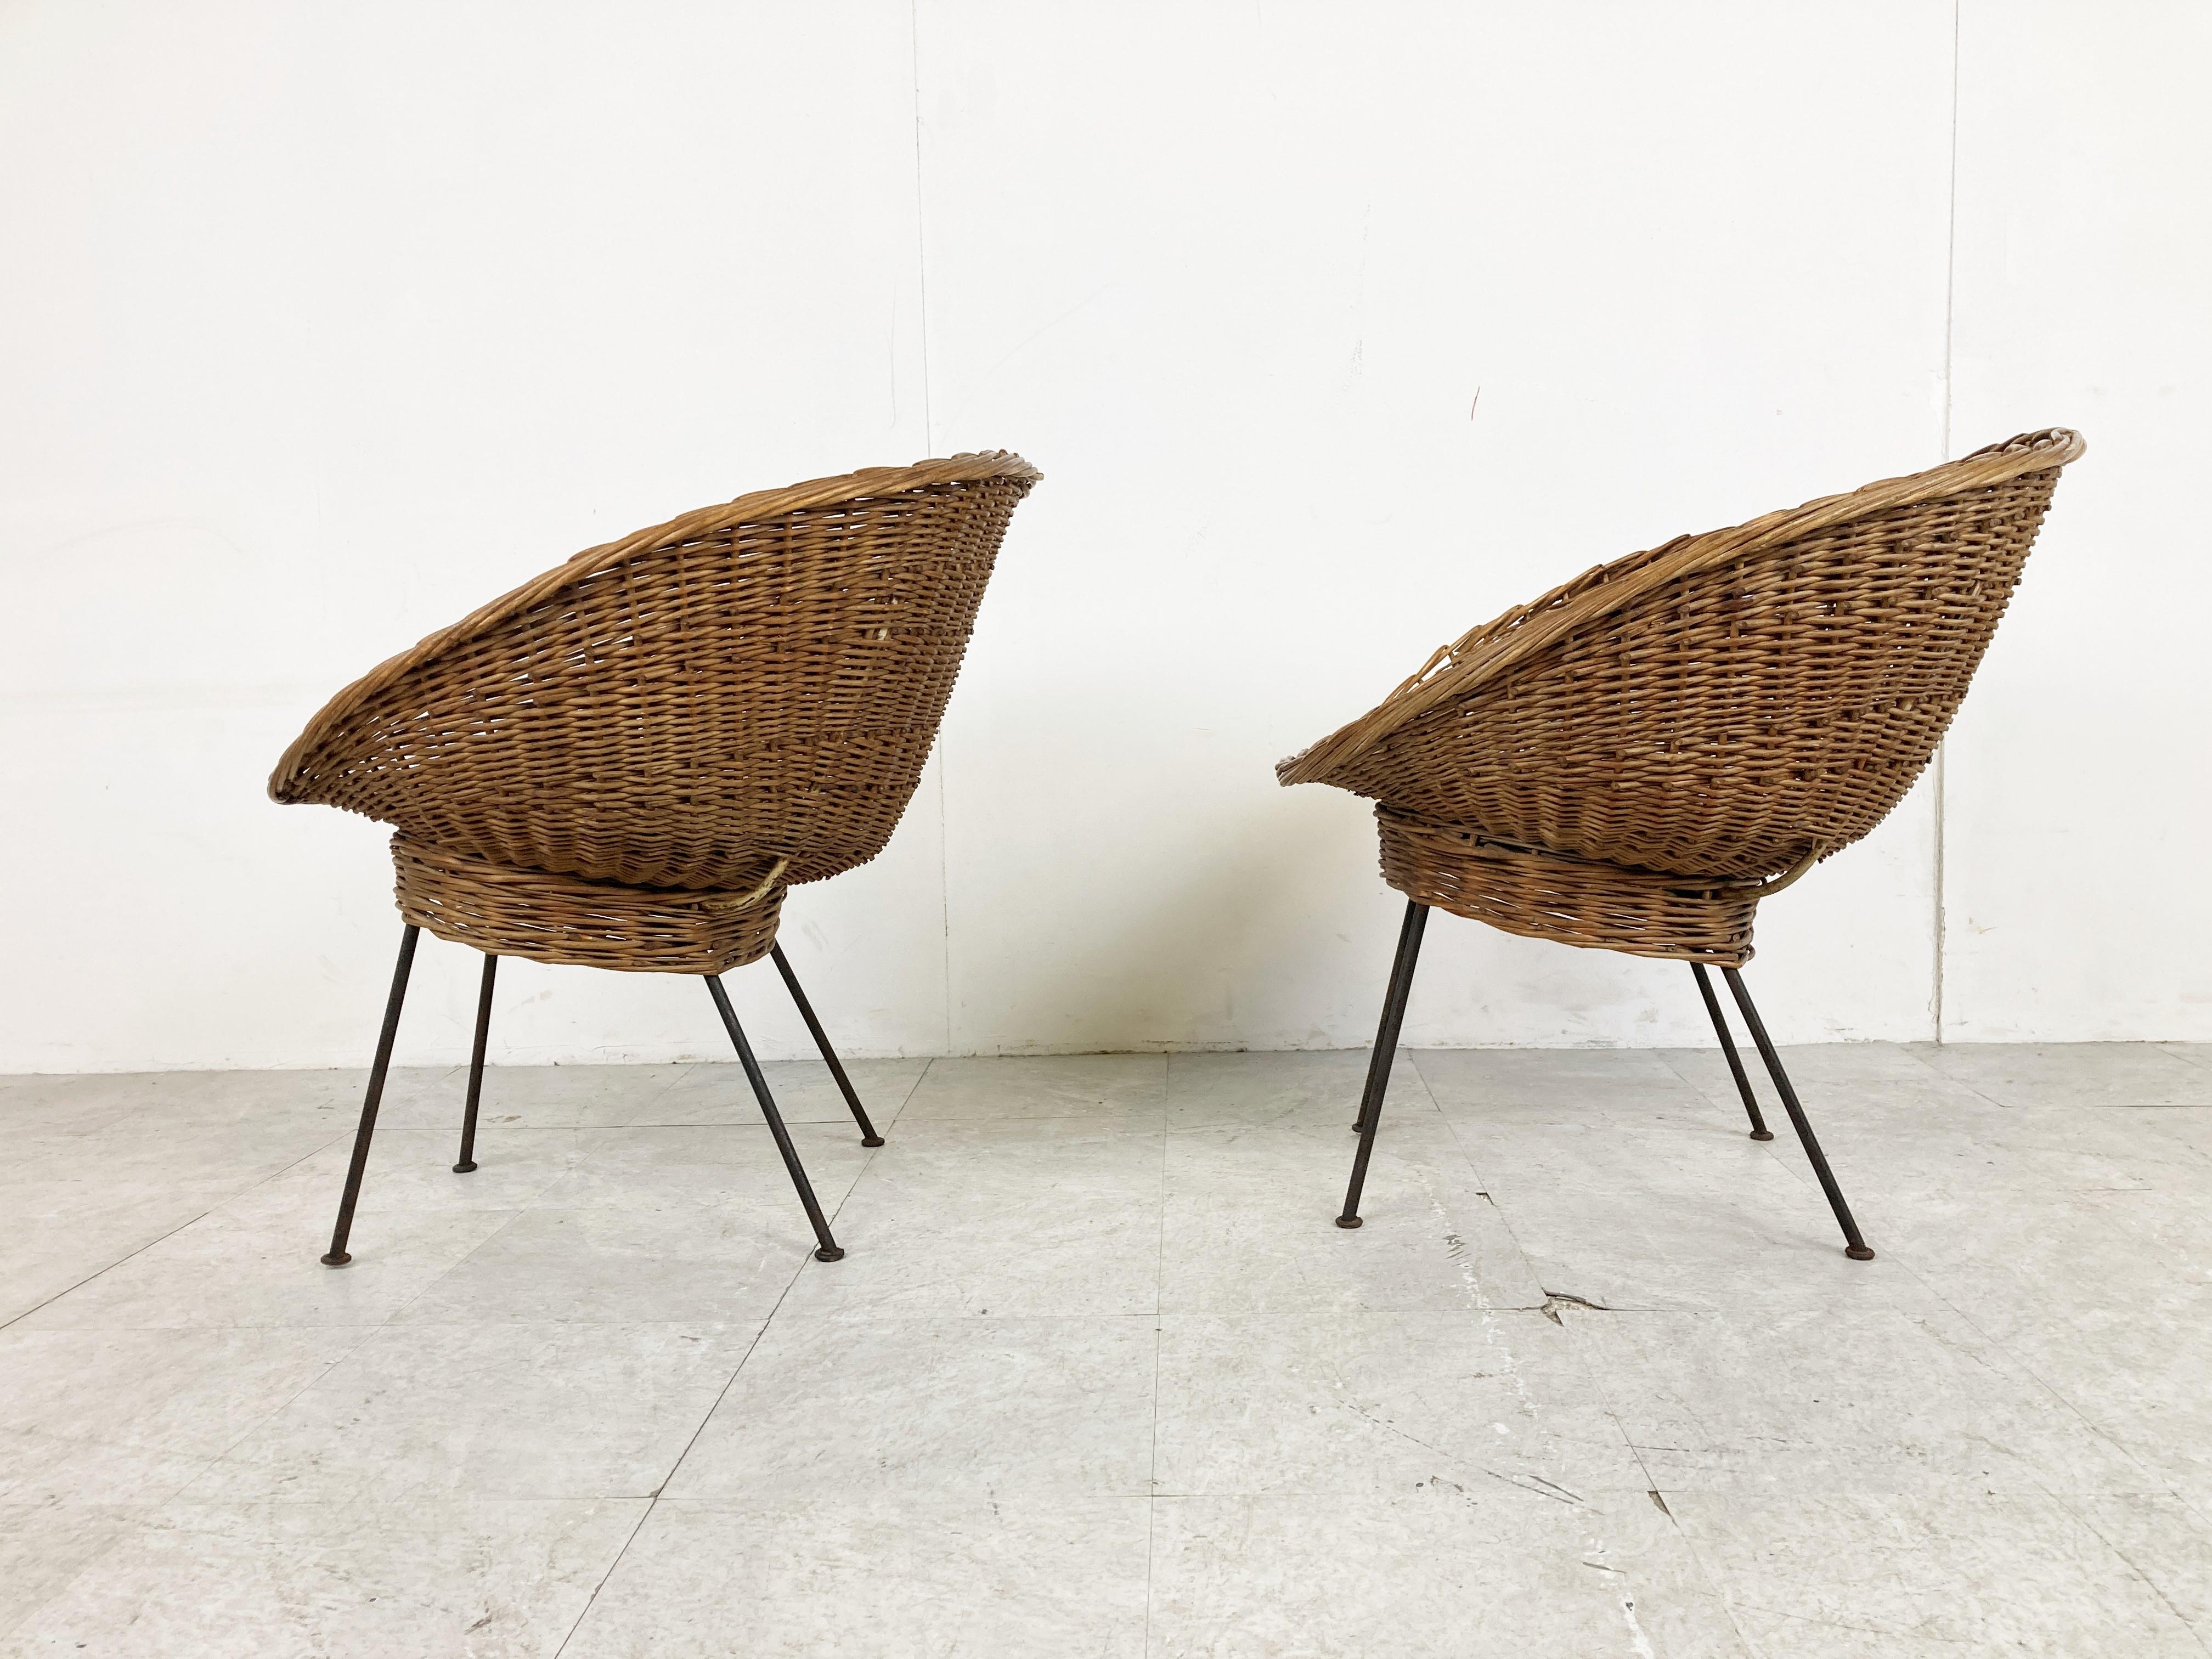 Vintage Italian Wicker Lounge Chairs, Set of 2, 1960s For Sale 2